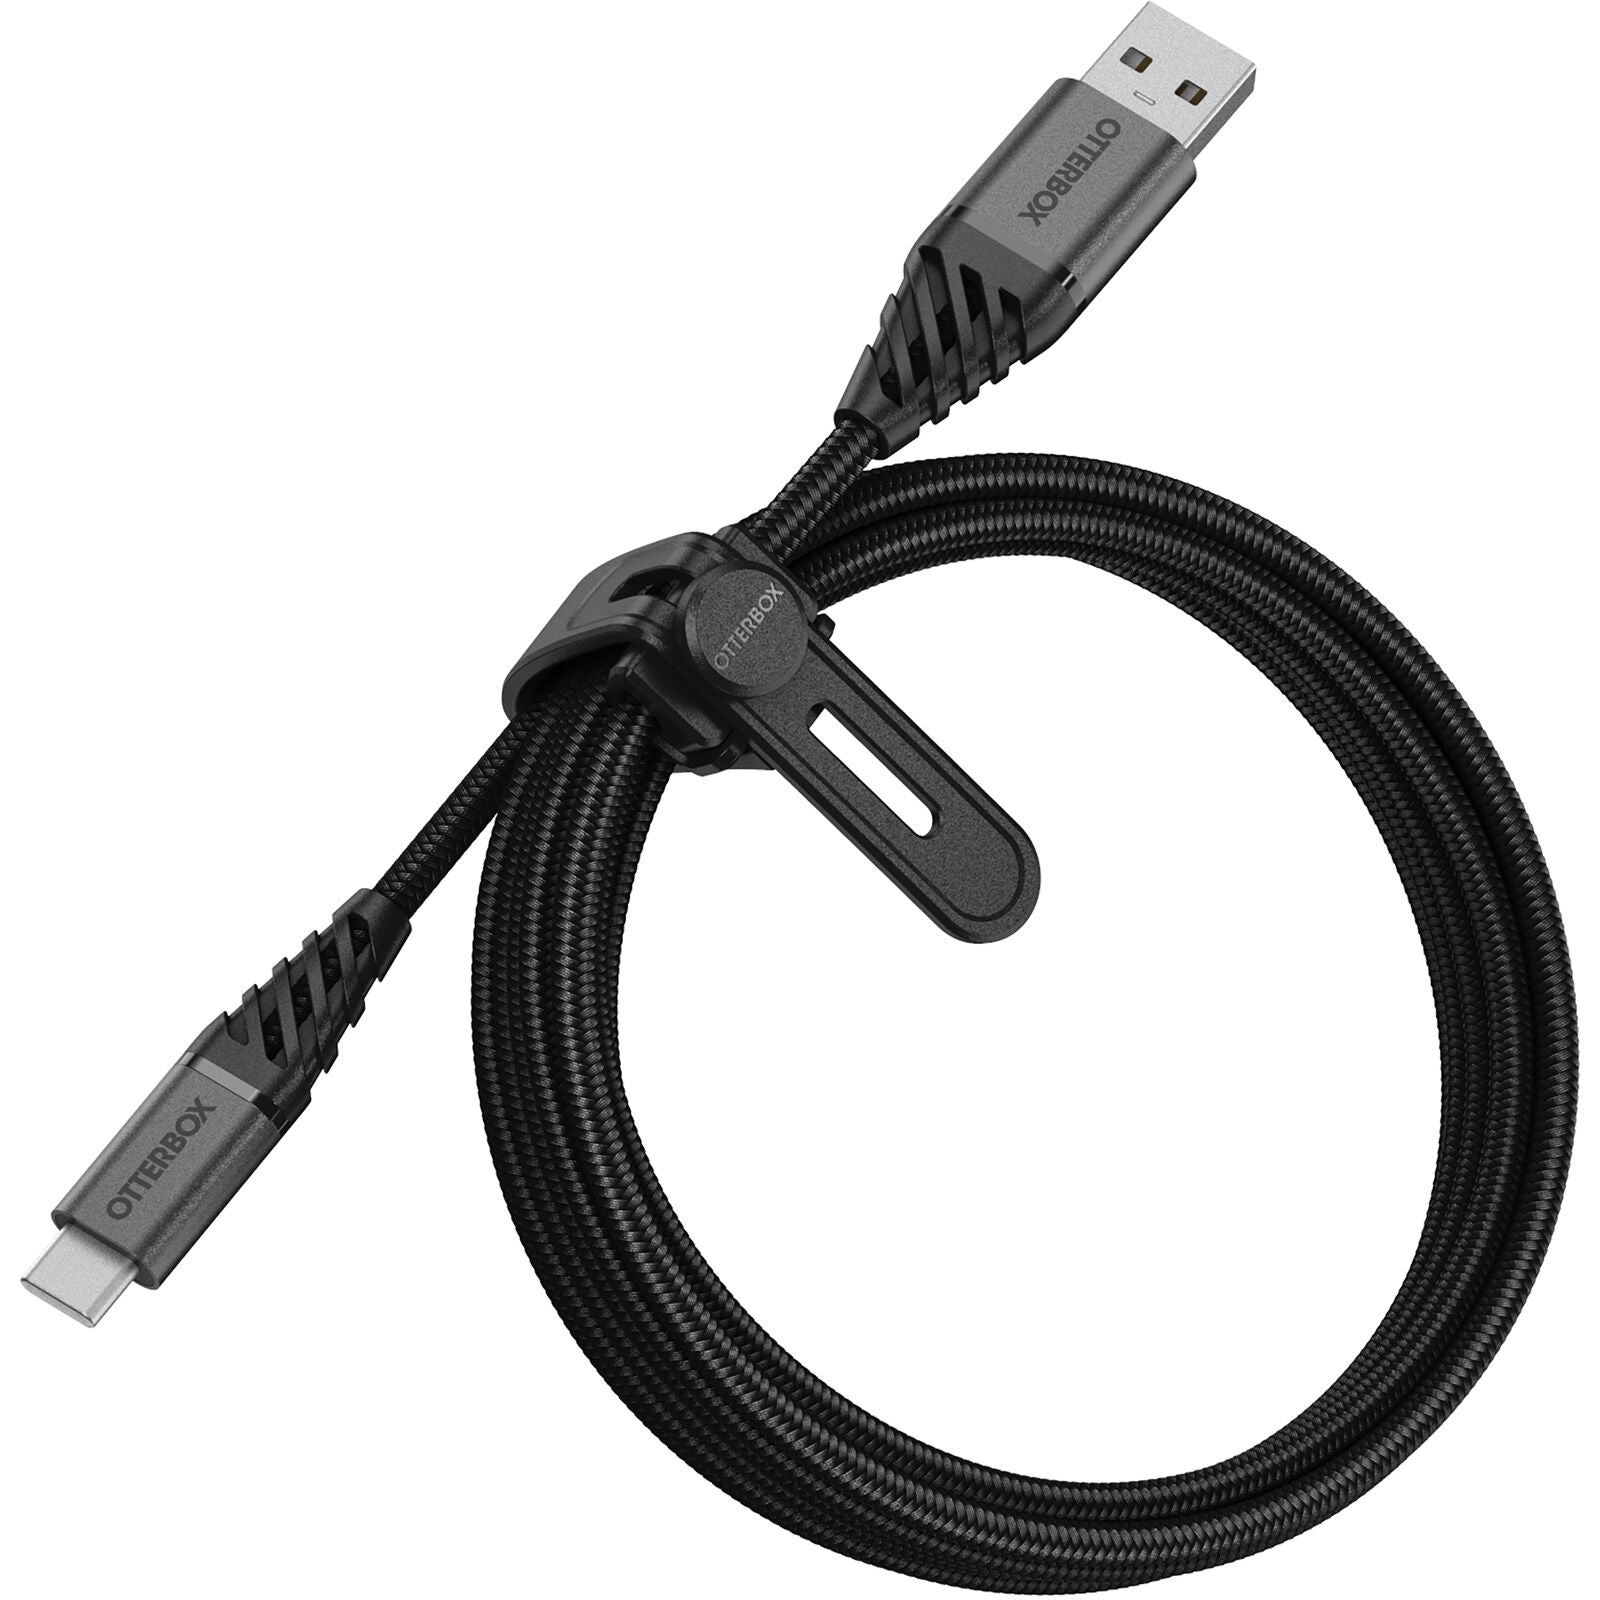 OtterBox USB-C to USB-A Premium Cable (2M) - Black (78-52665), USB 2.0, 3 AMPS (60W), Bend/Flex-Tested 10K Times, Braided Nylon, Ultra Rugged